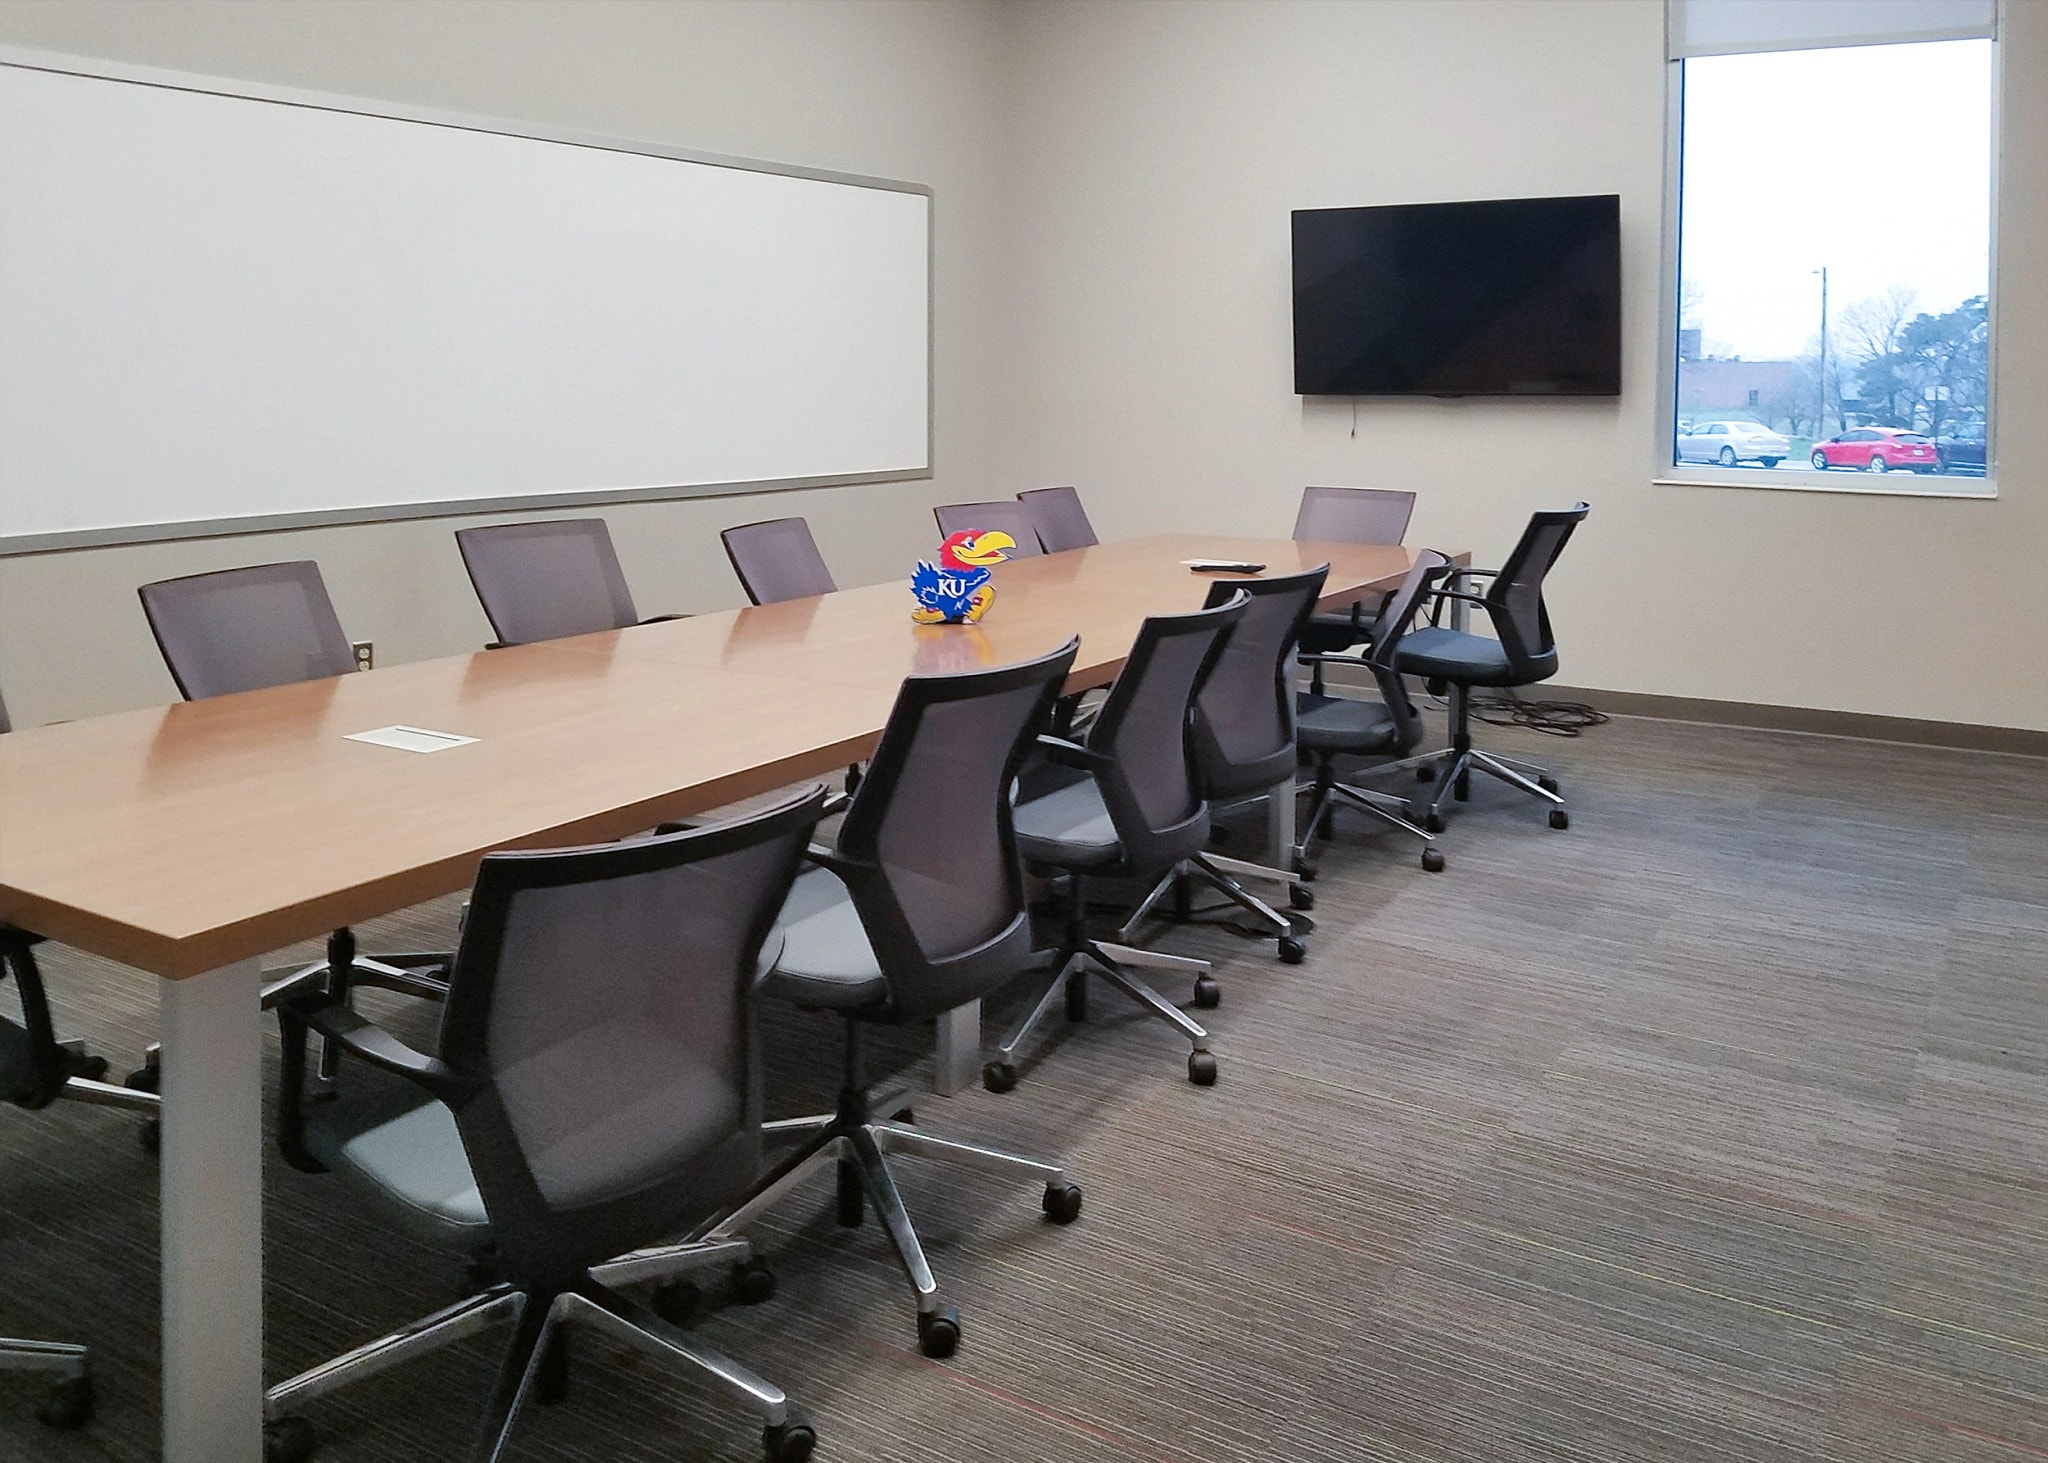 Chairs line a long conference table on two sides; the walls have a whiteboard and a video monitor.